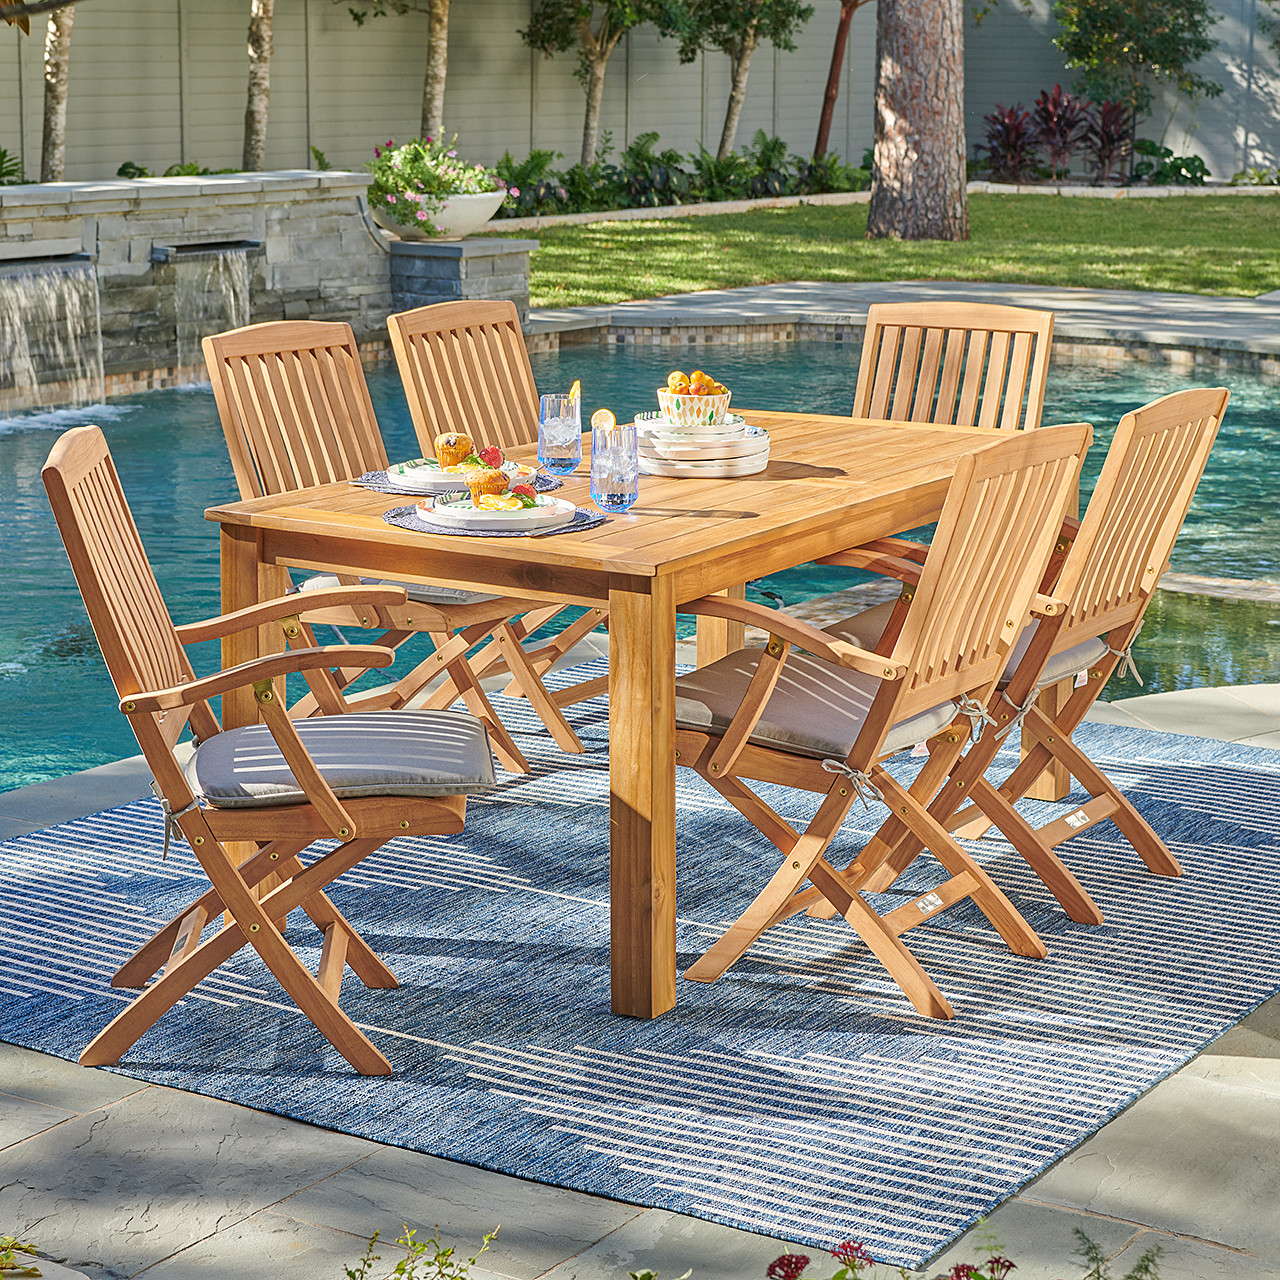 Westport Teak with Cushions 7 Piece Arm Dining Set + Oxford 71 x 36 in. Table